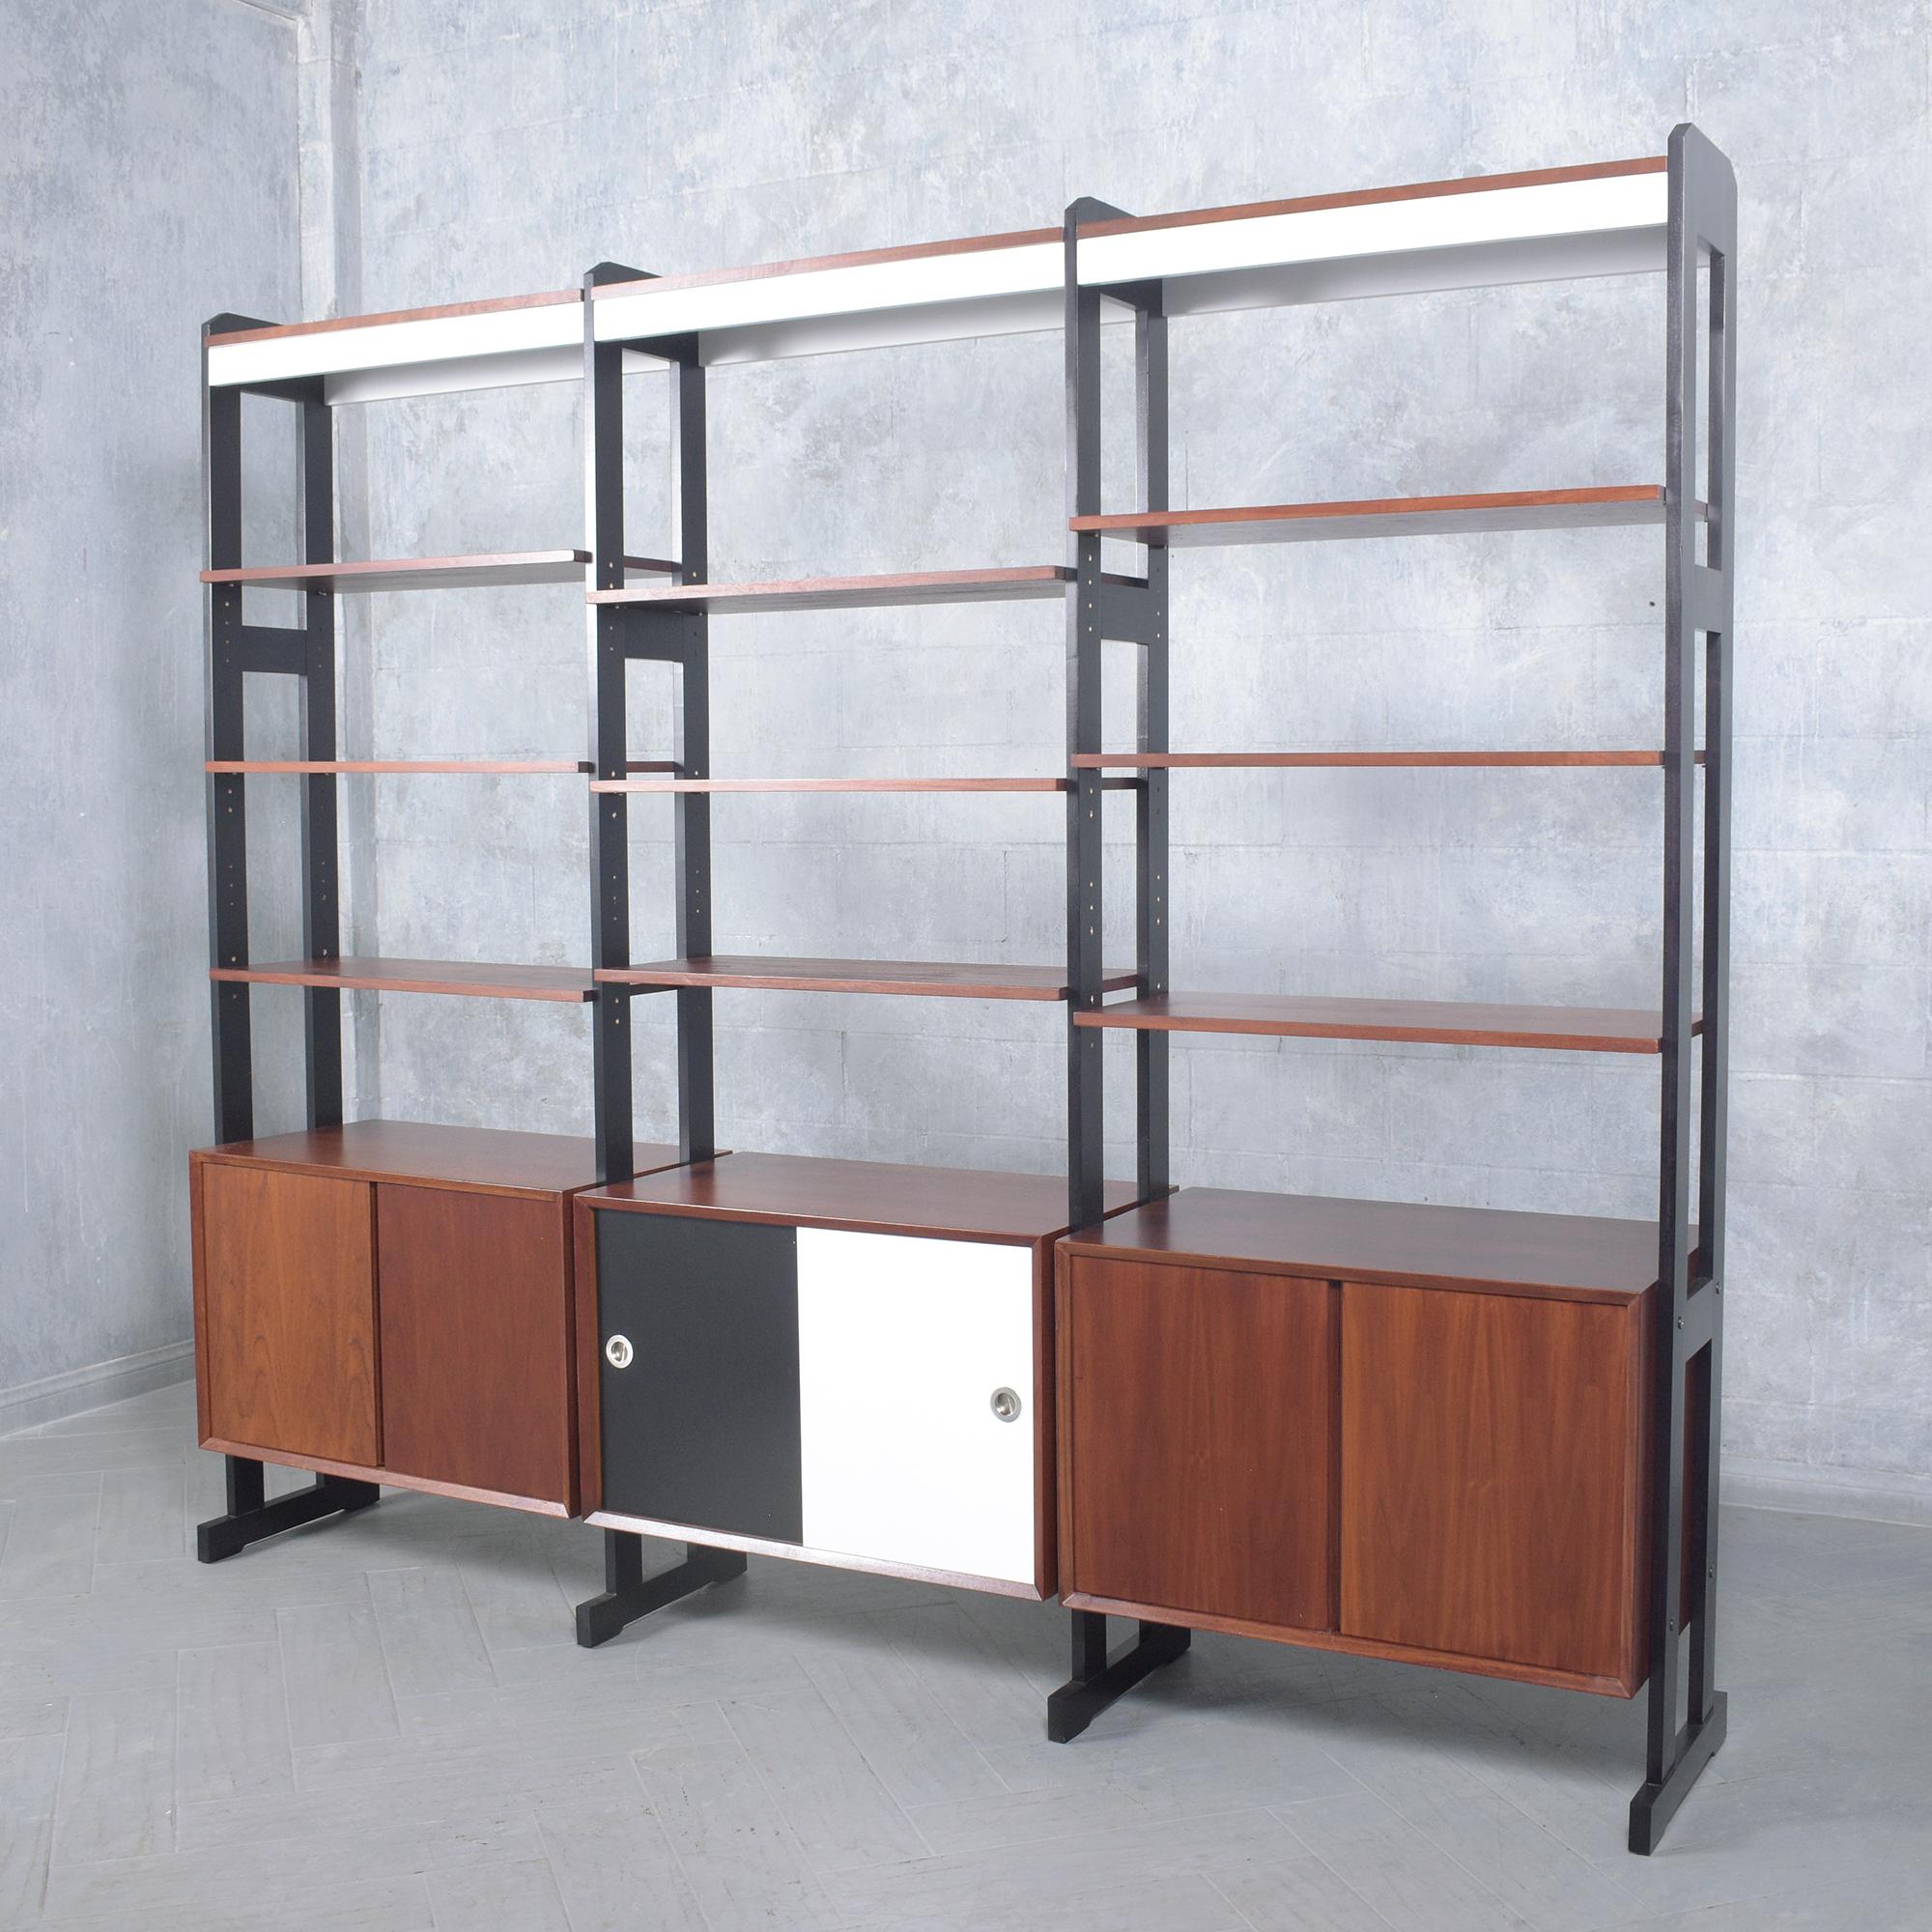 Discover the timeless charm of our fully restored vintage mid-century modern bookshelf, crafted from high-quality teak in the 1960s. This piece features a stunning walnut, white, and black color combination with a satin lacquer finish, enhancing its